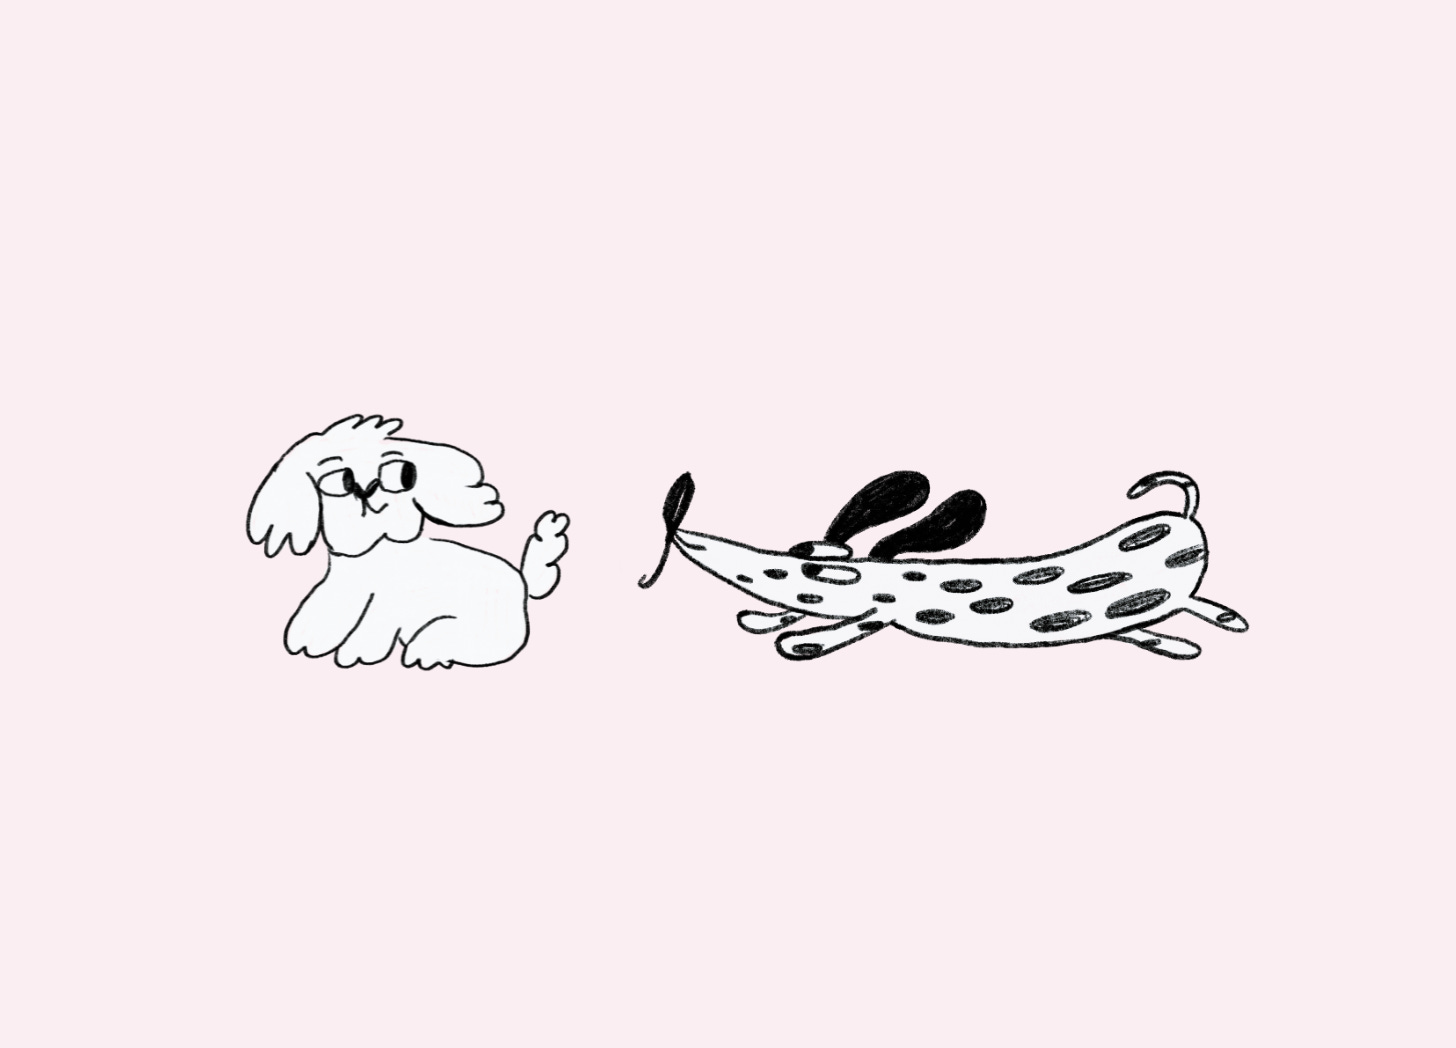 Illustration of a long spotted dog sniffing a little white dog.